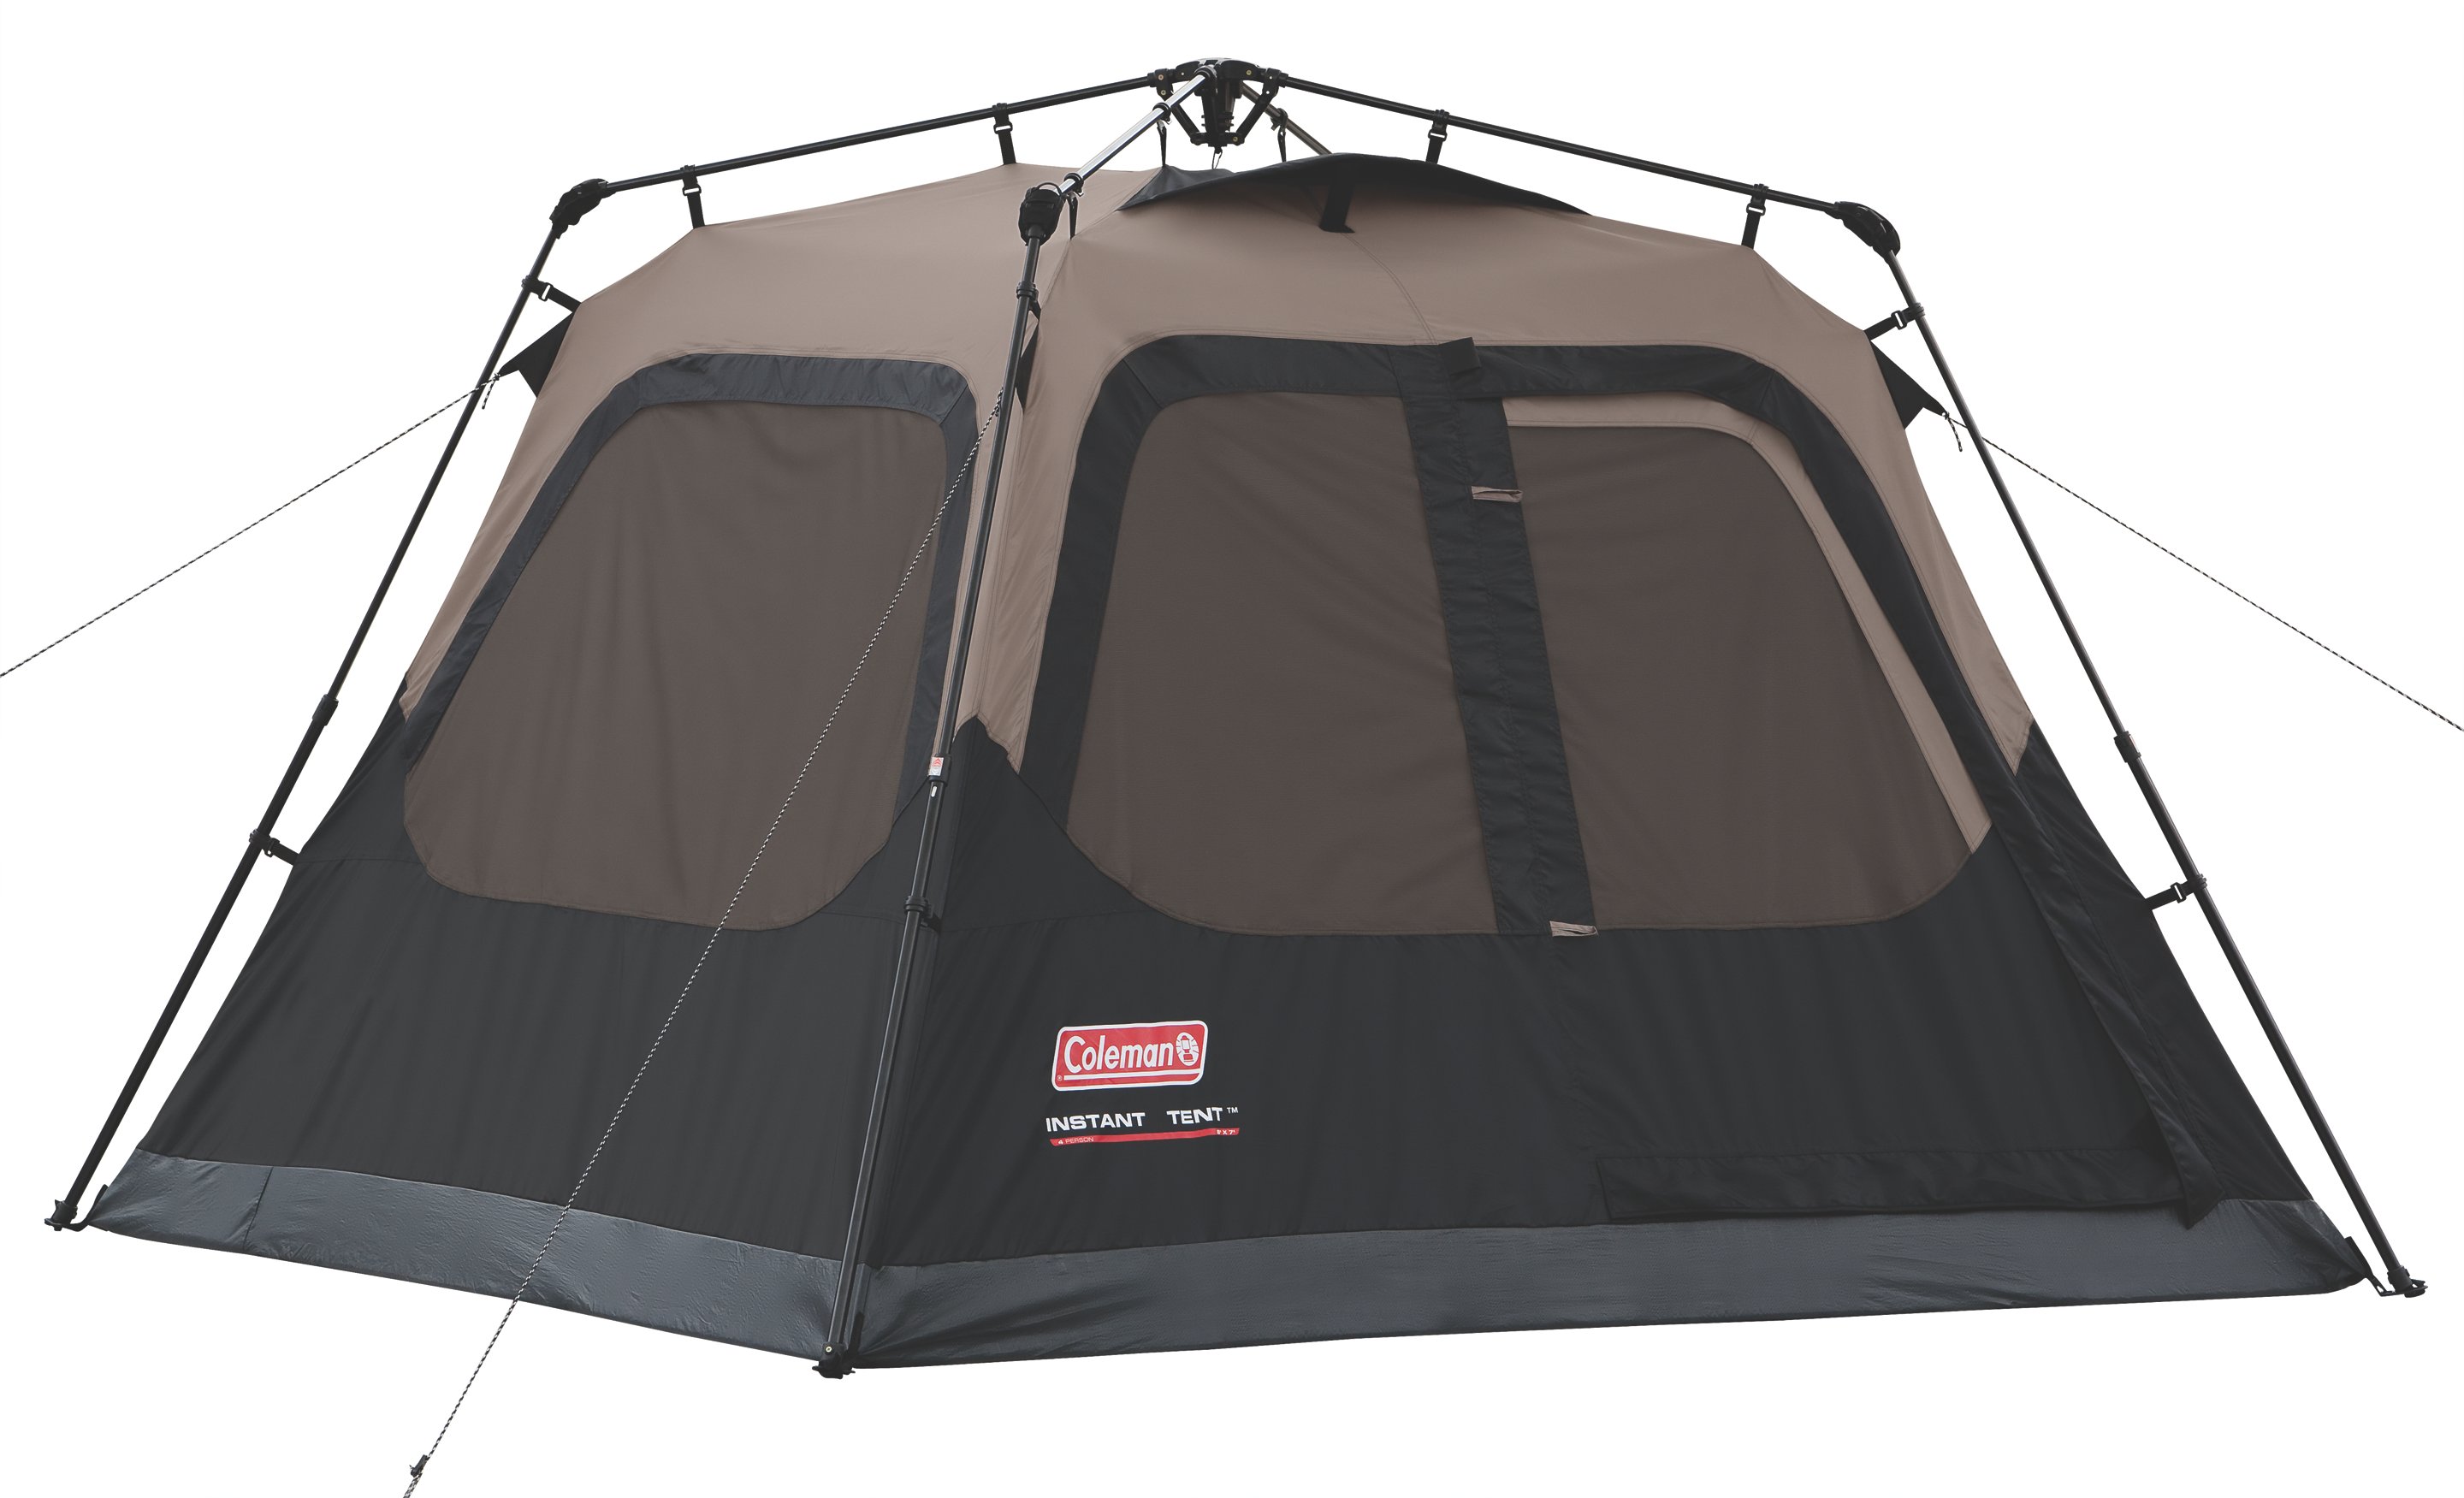 4-Person Cabin Camping Tent with Instant Setup | Coleman